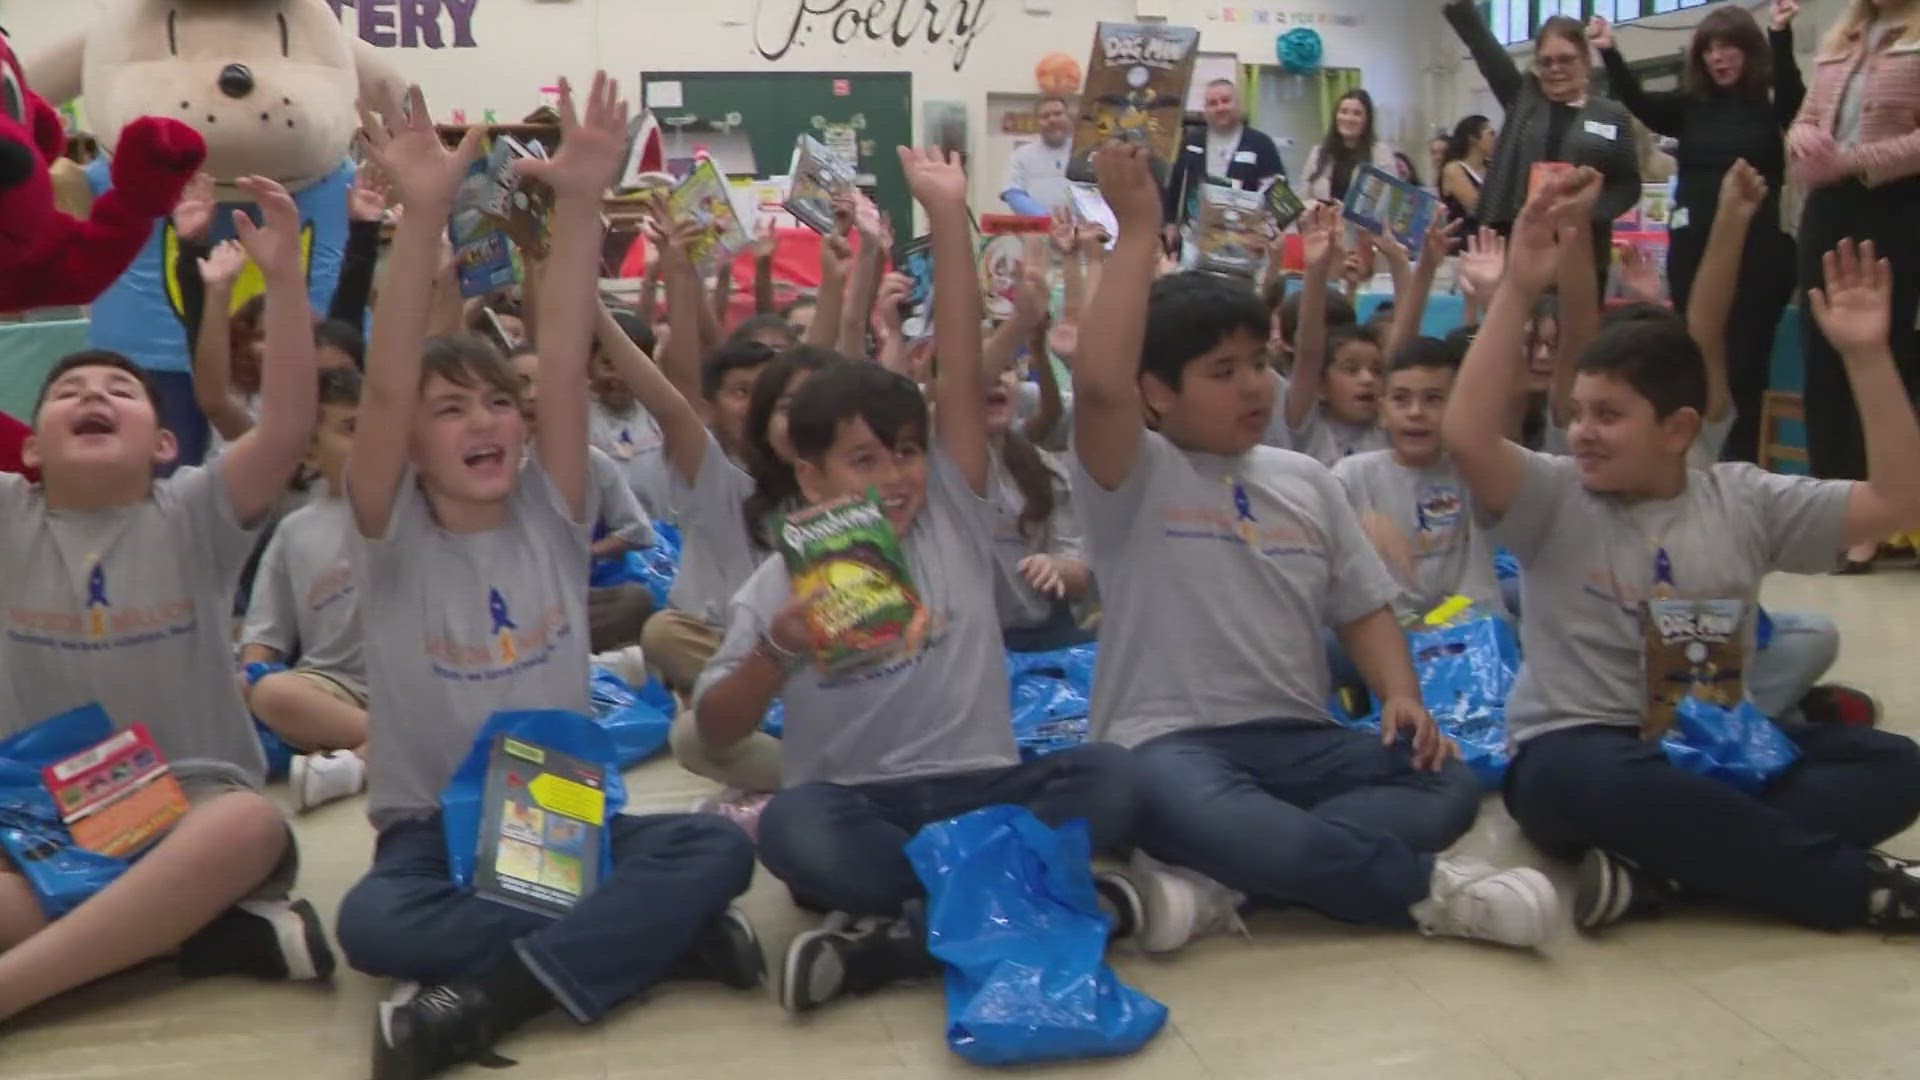 In honor of the milestone, the 400 students at Robert Browning Elementary received six free books of their choice.